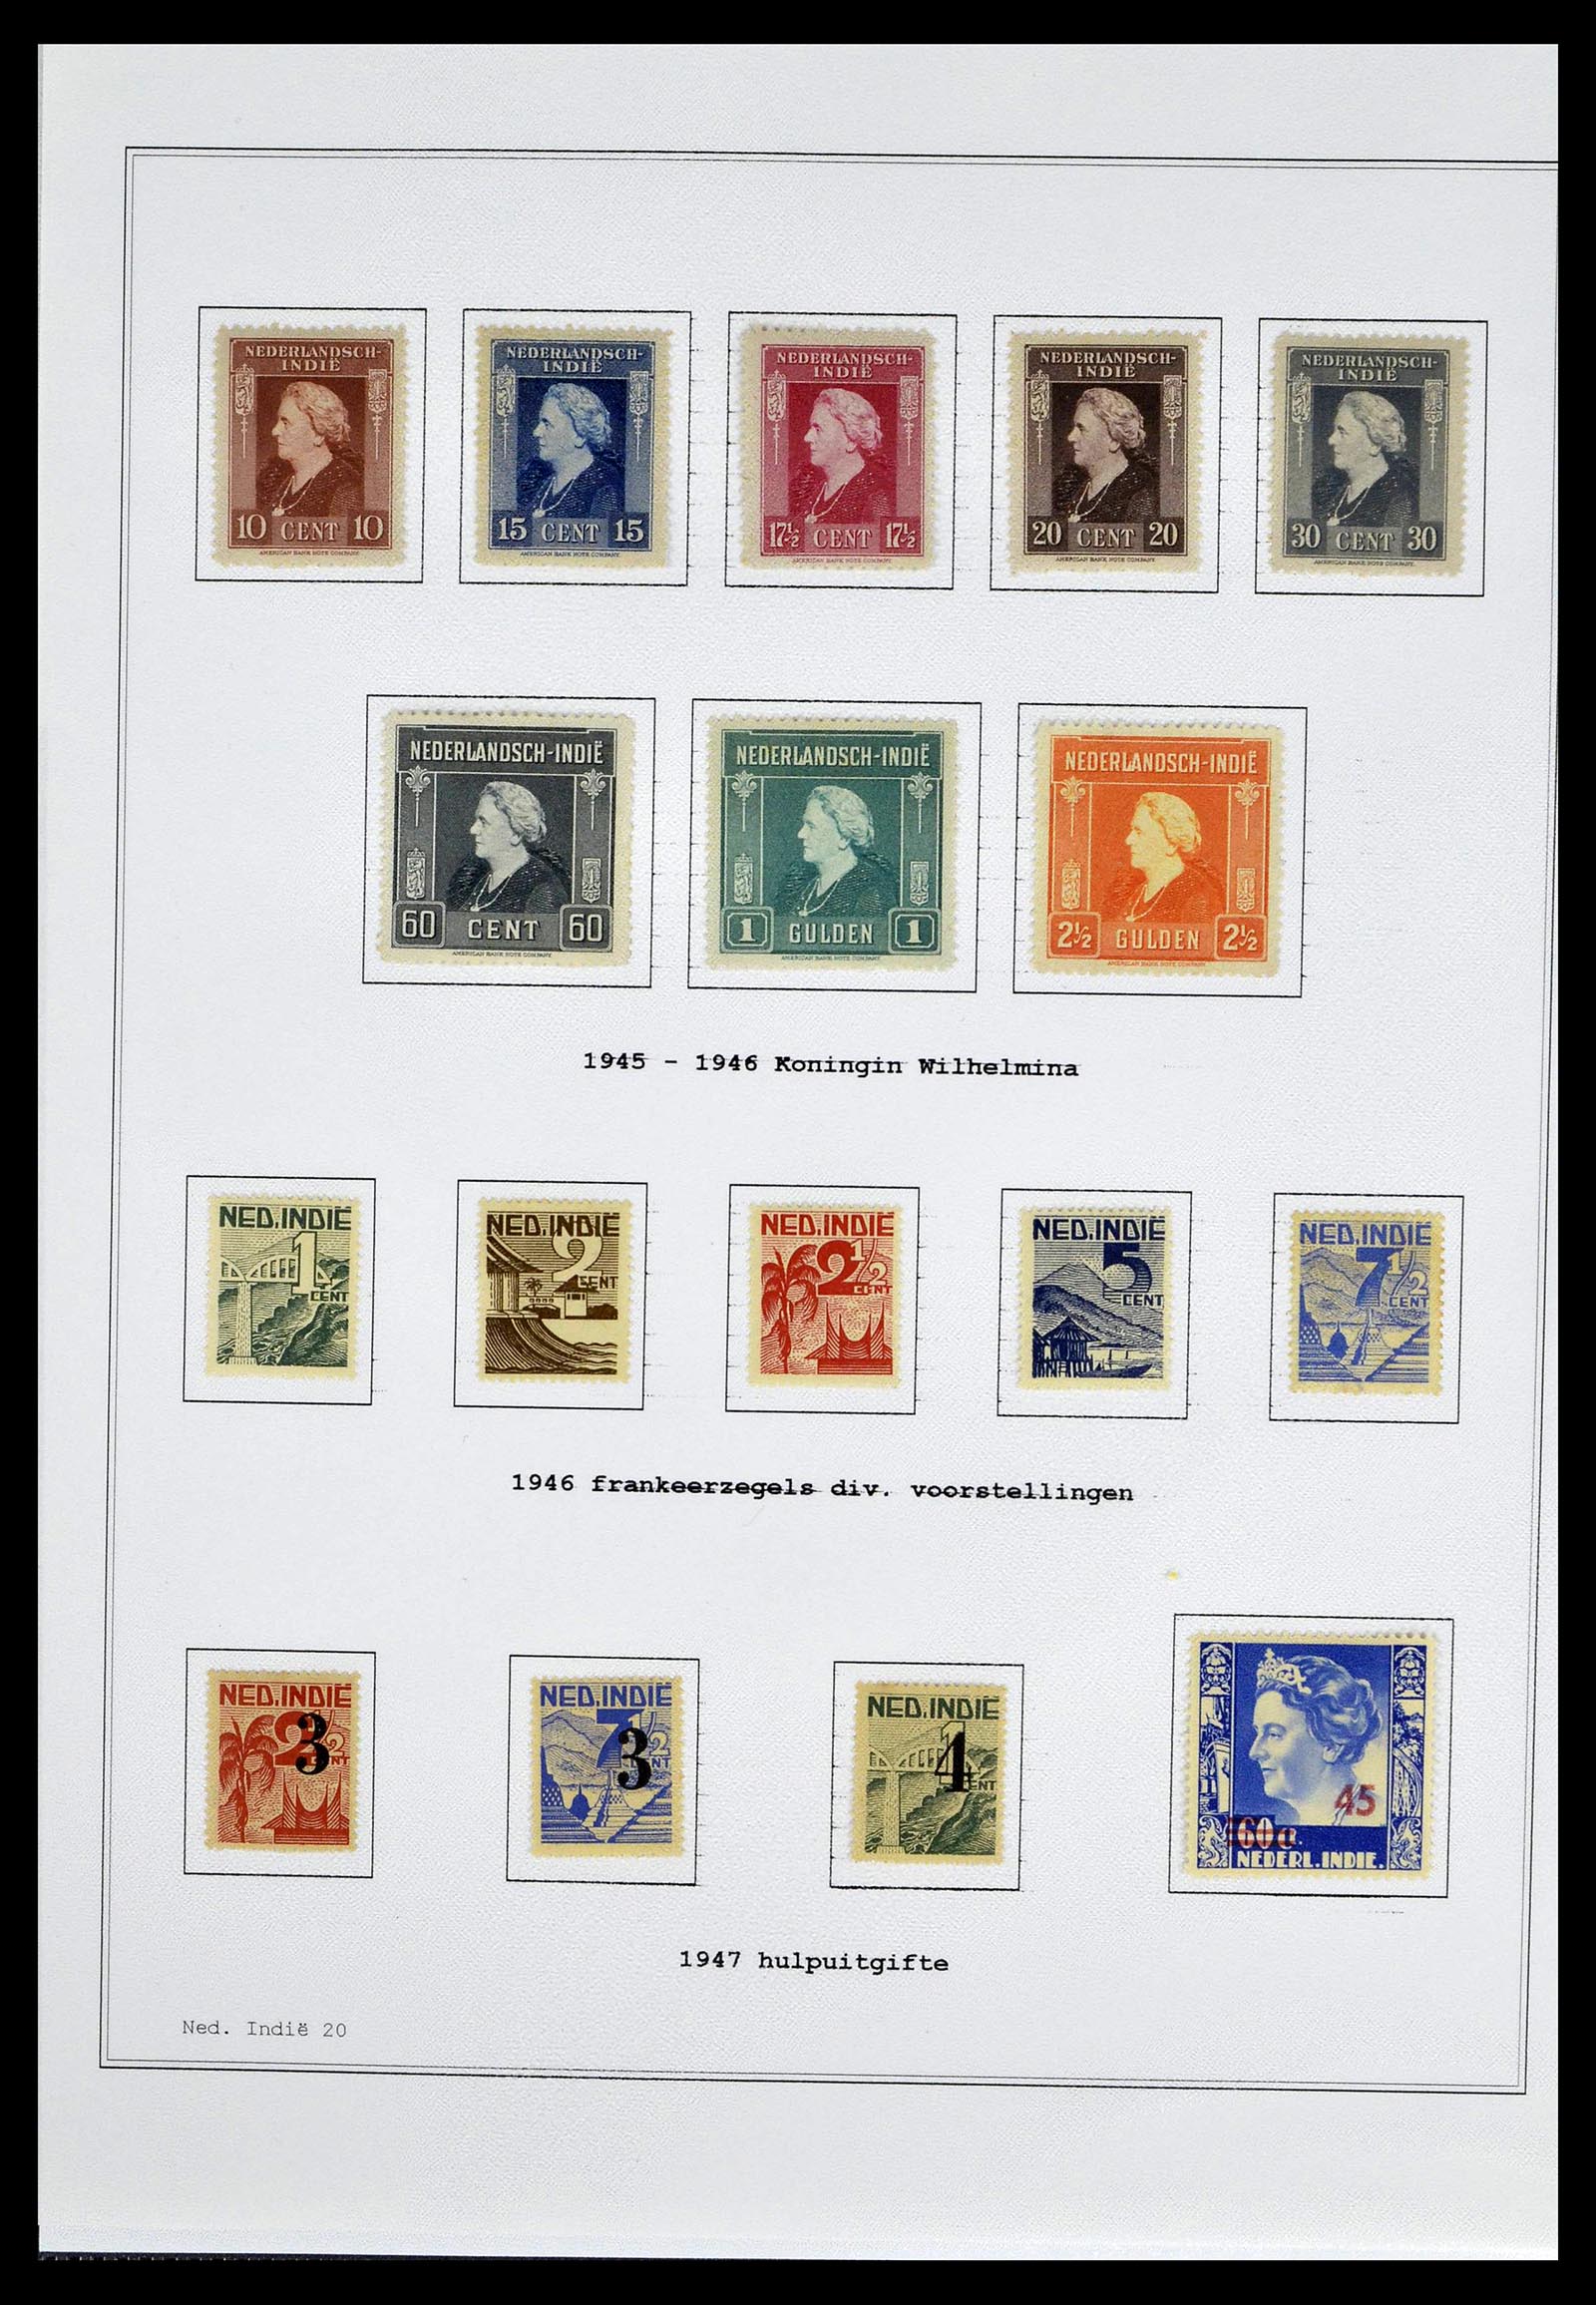 39026 0040 - Stamp collection 39026 Dutch east Indies and Suriname 1864-1975.